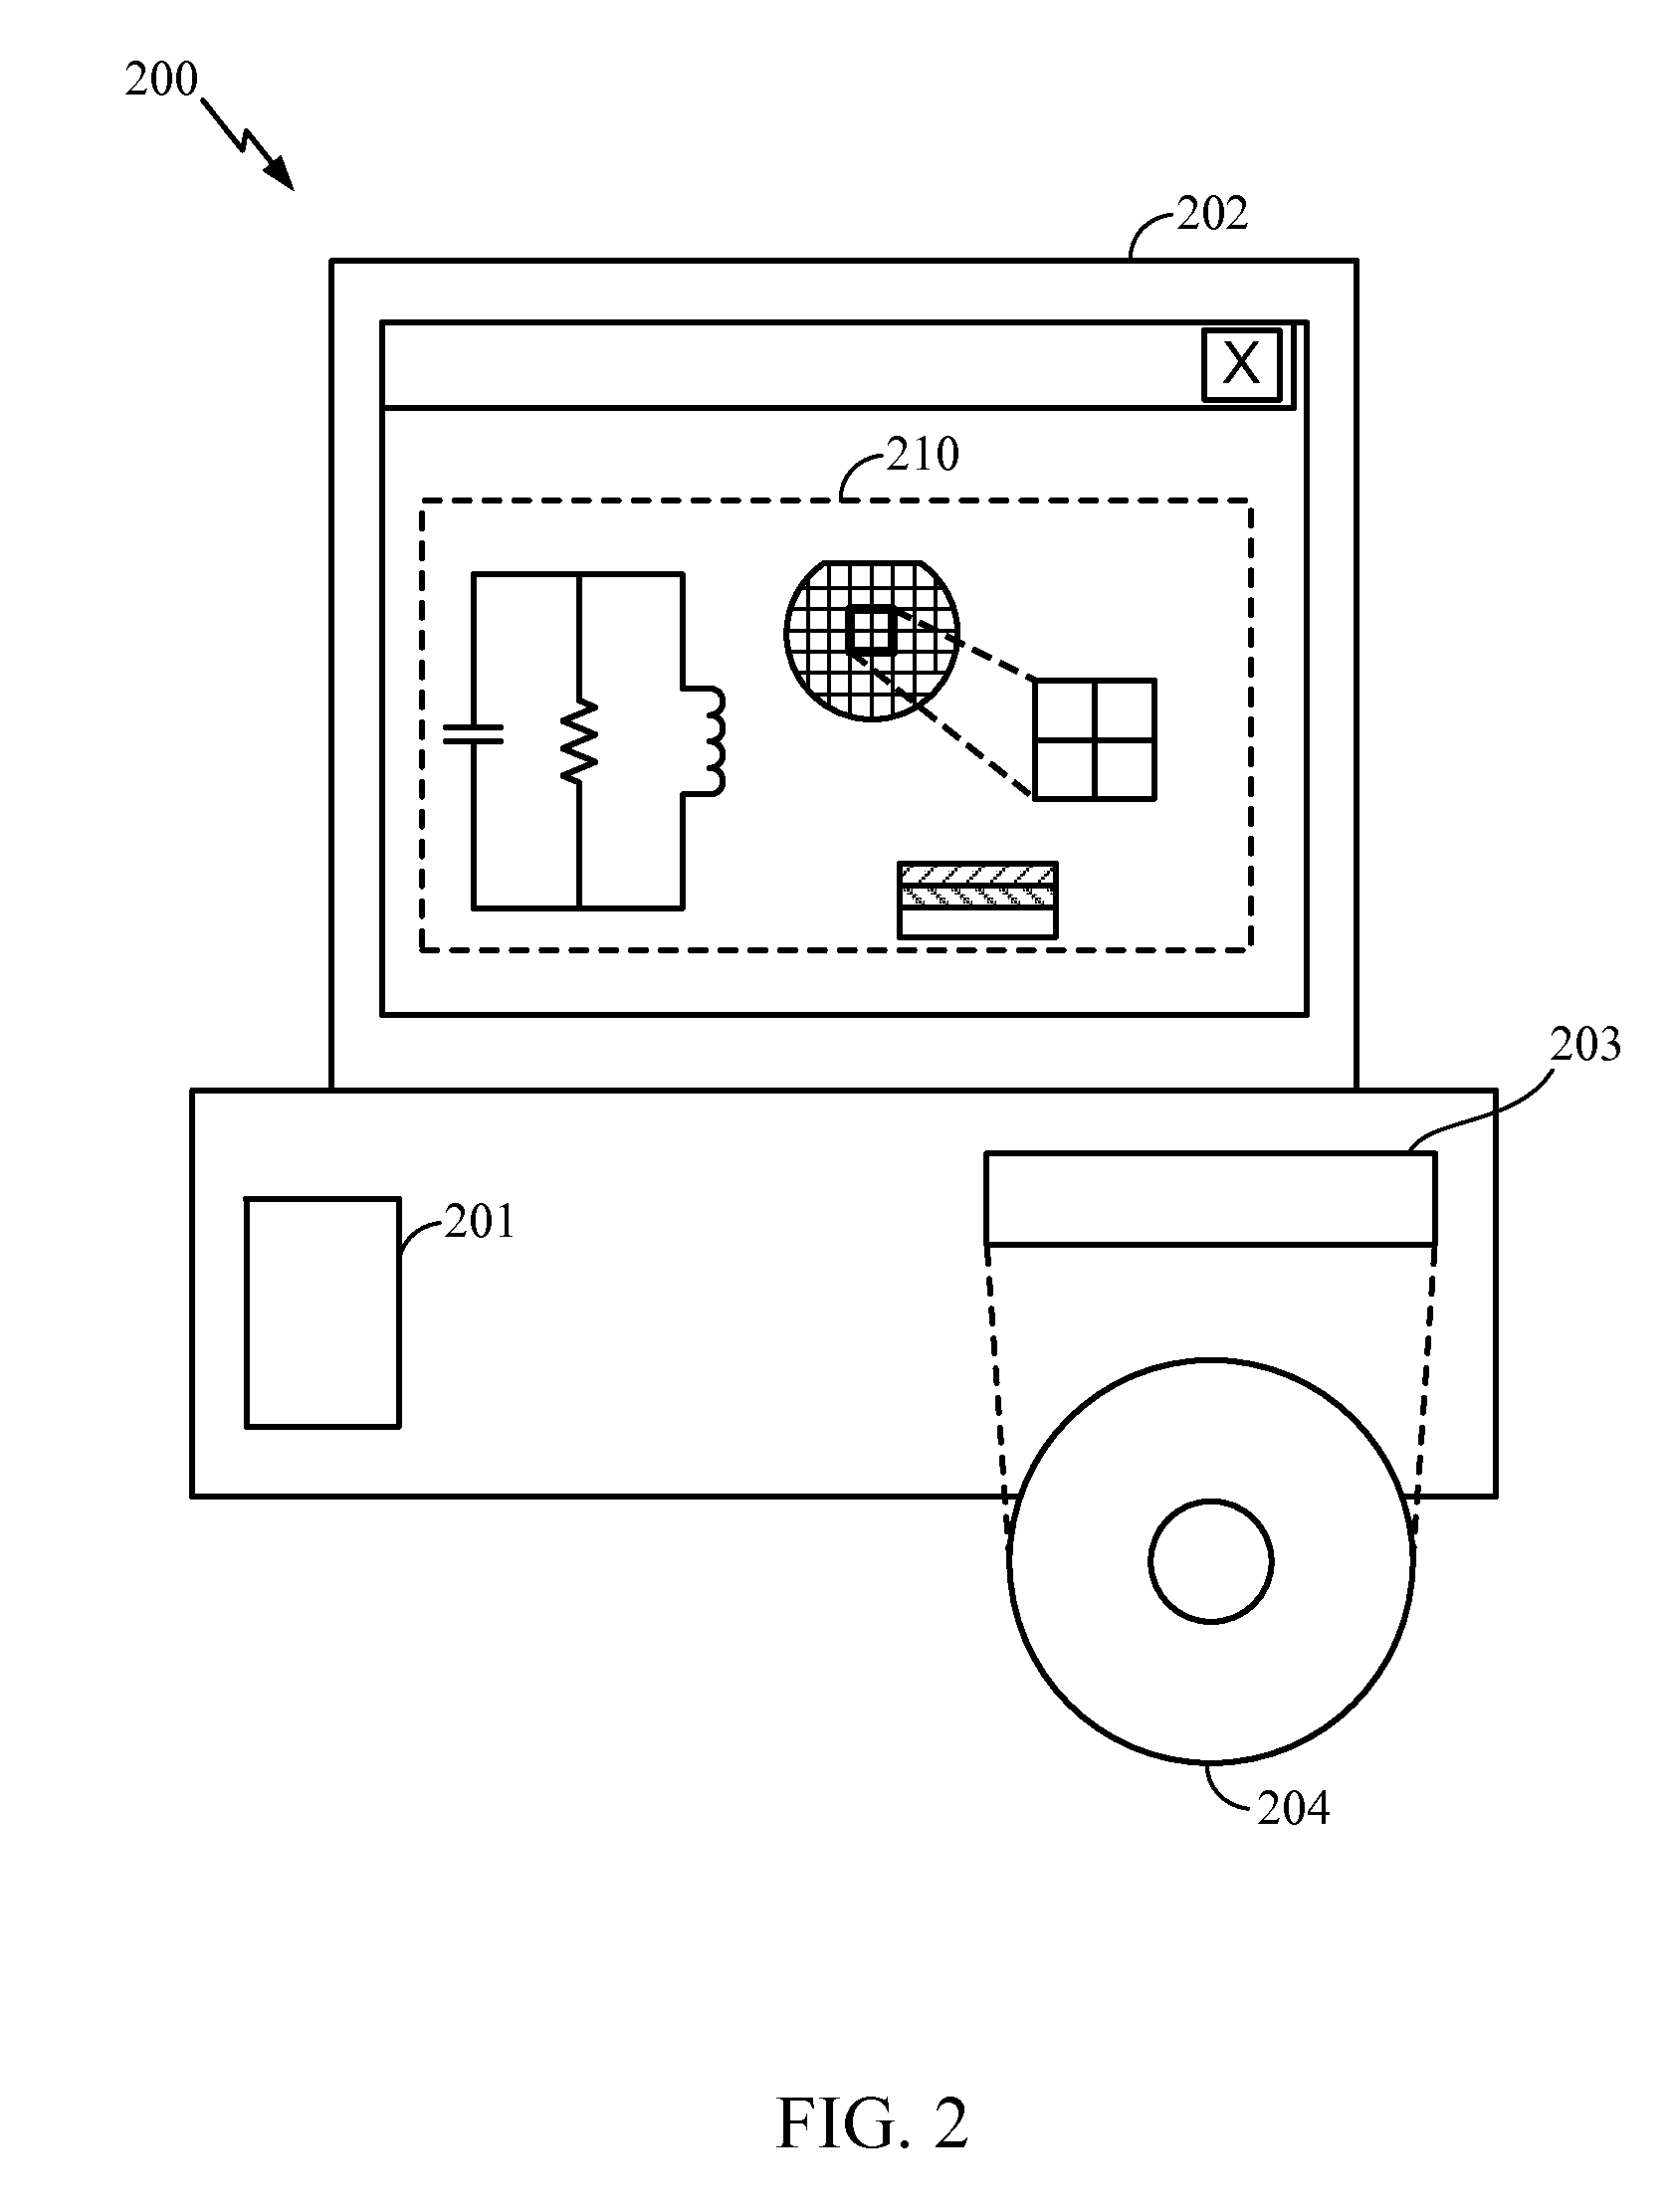 Integrated Voltage Regulator with Embedded Passive Device(s)